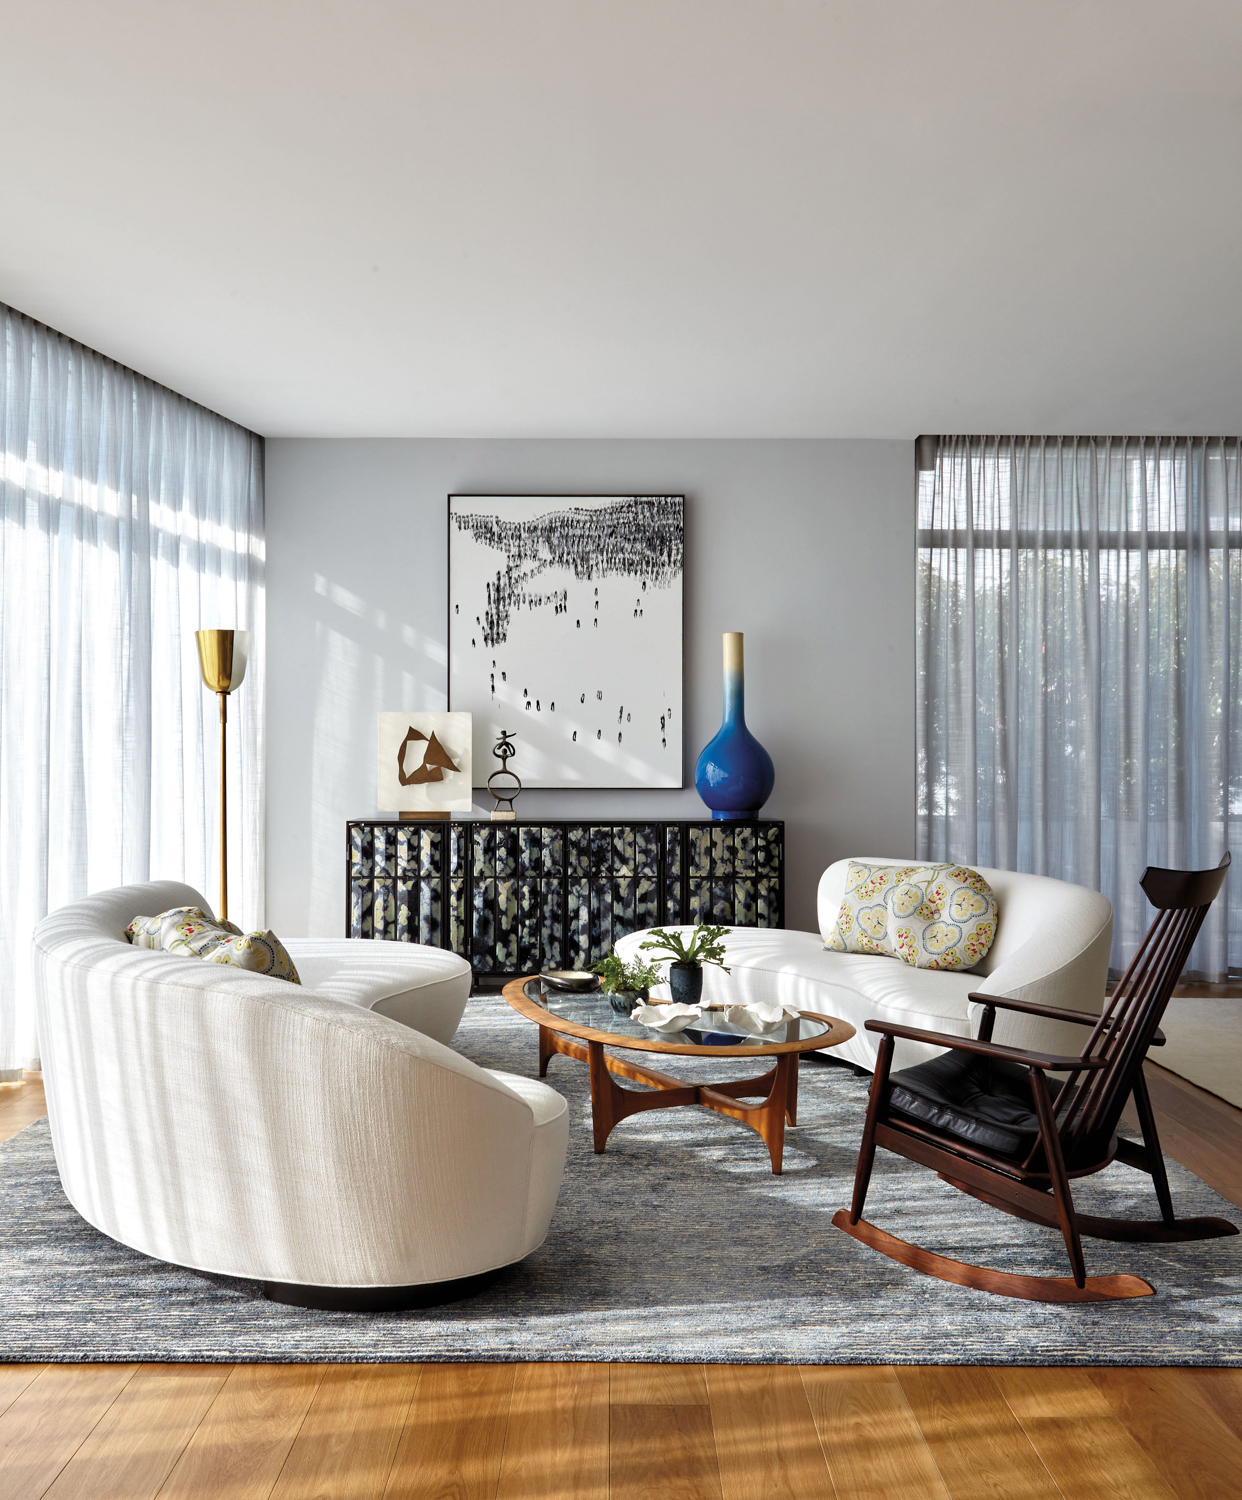 Living space with curvy white sofas and a vintage rocking chair atop a grey area rug